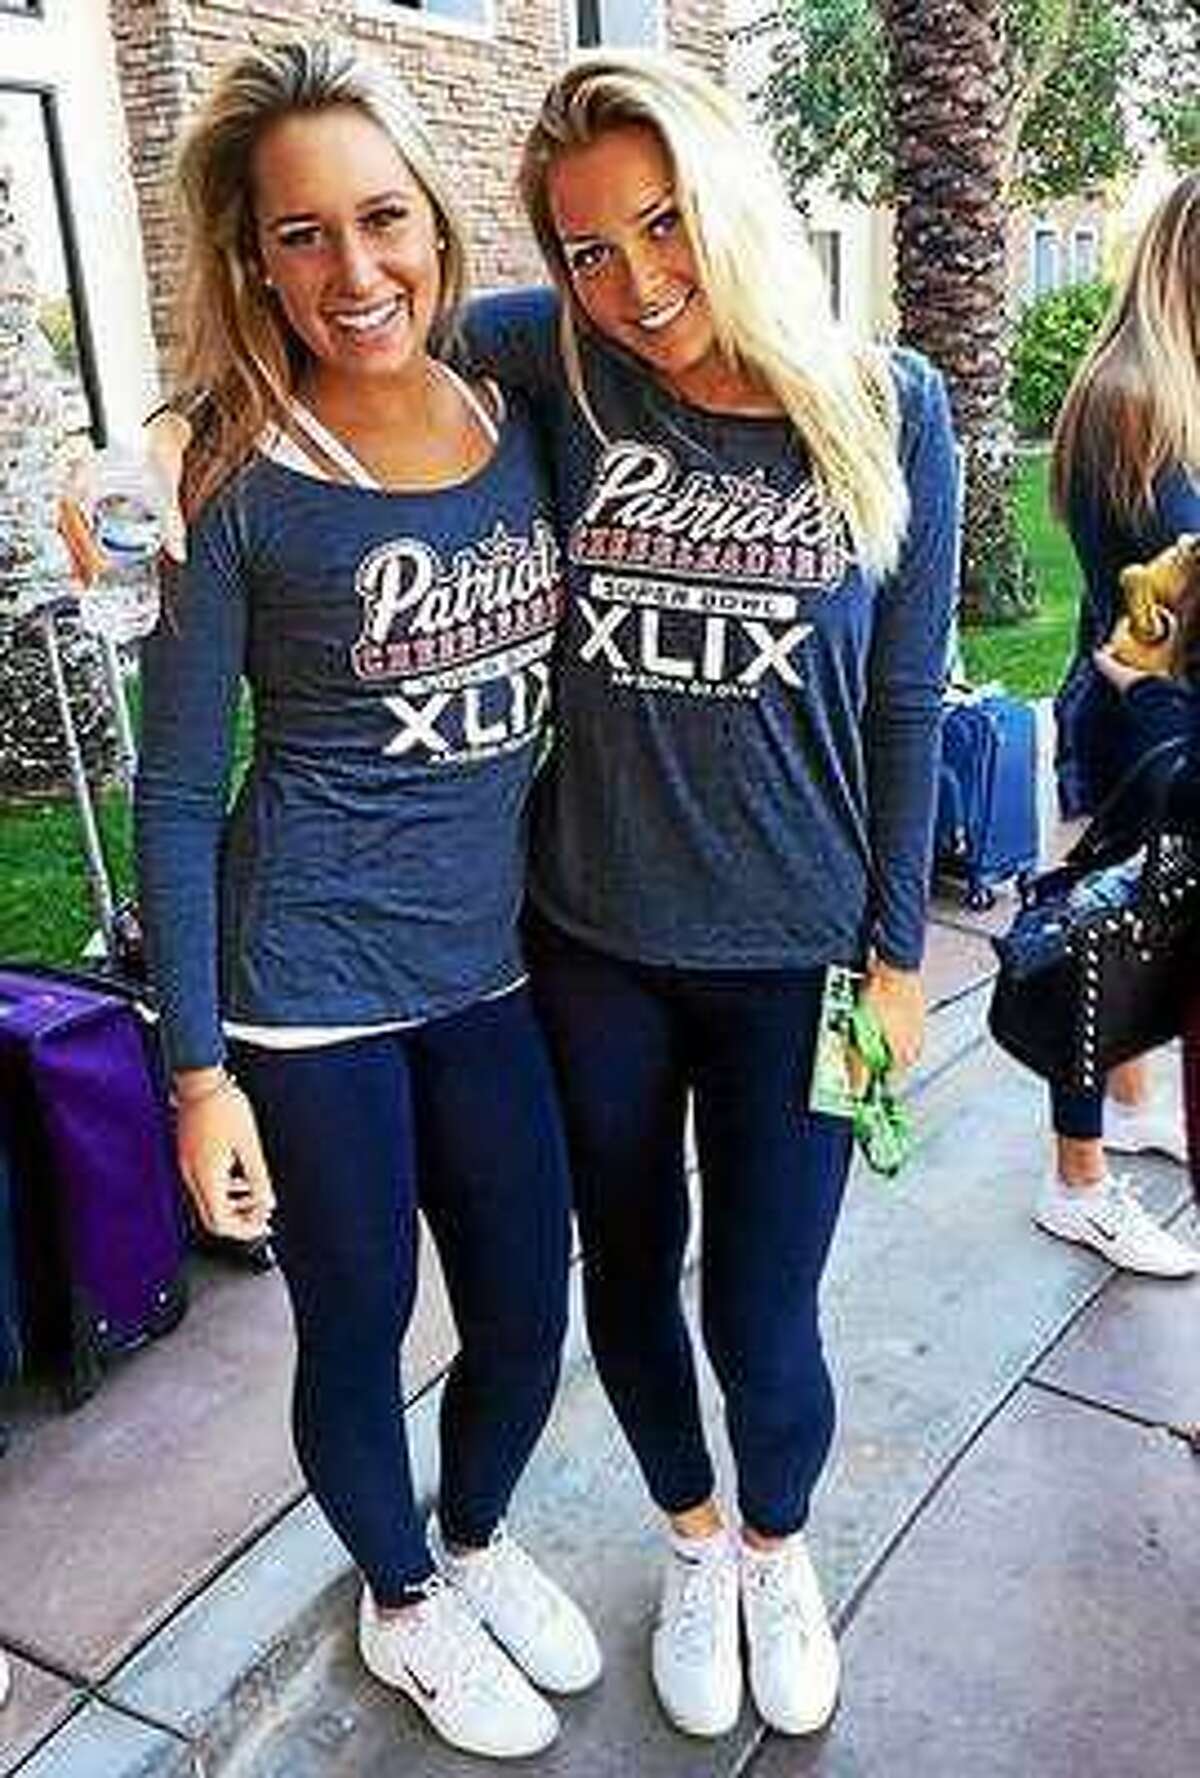 Patriot?’s cheerleaders Brittany Dickie, left, and Camille Kostek, right, an H-K grad of 2010.